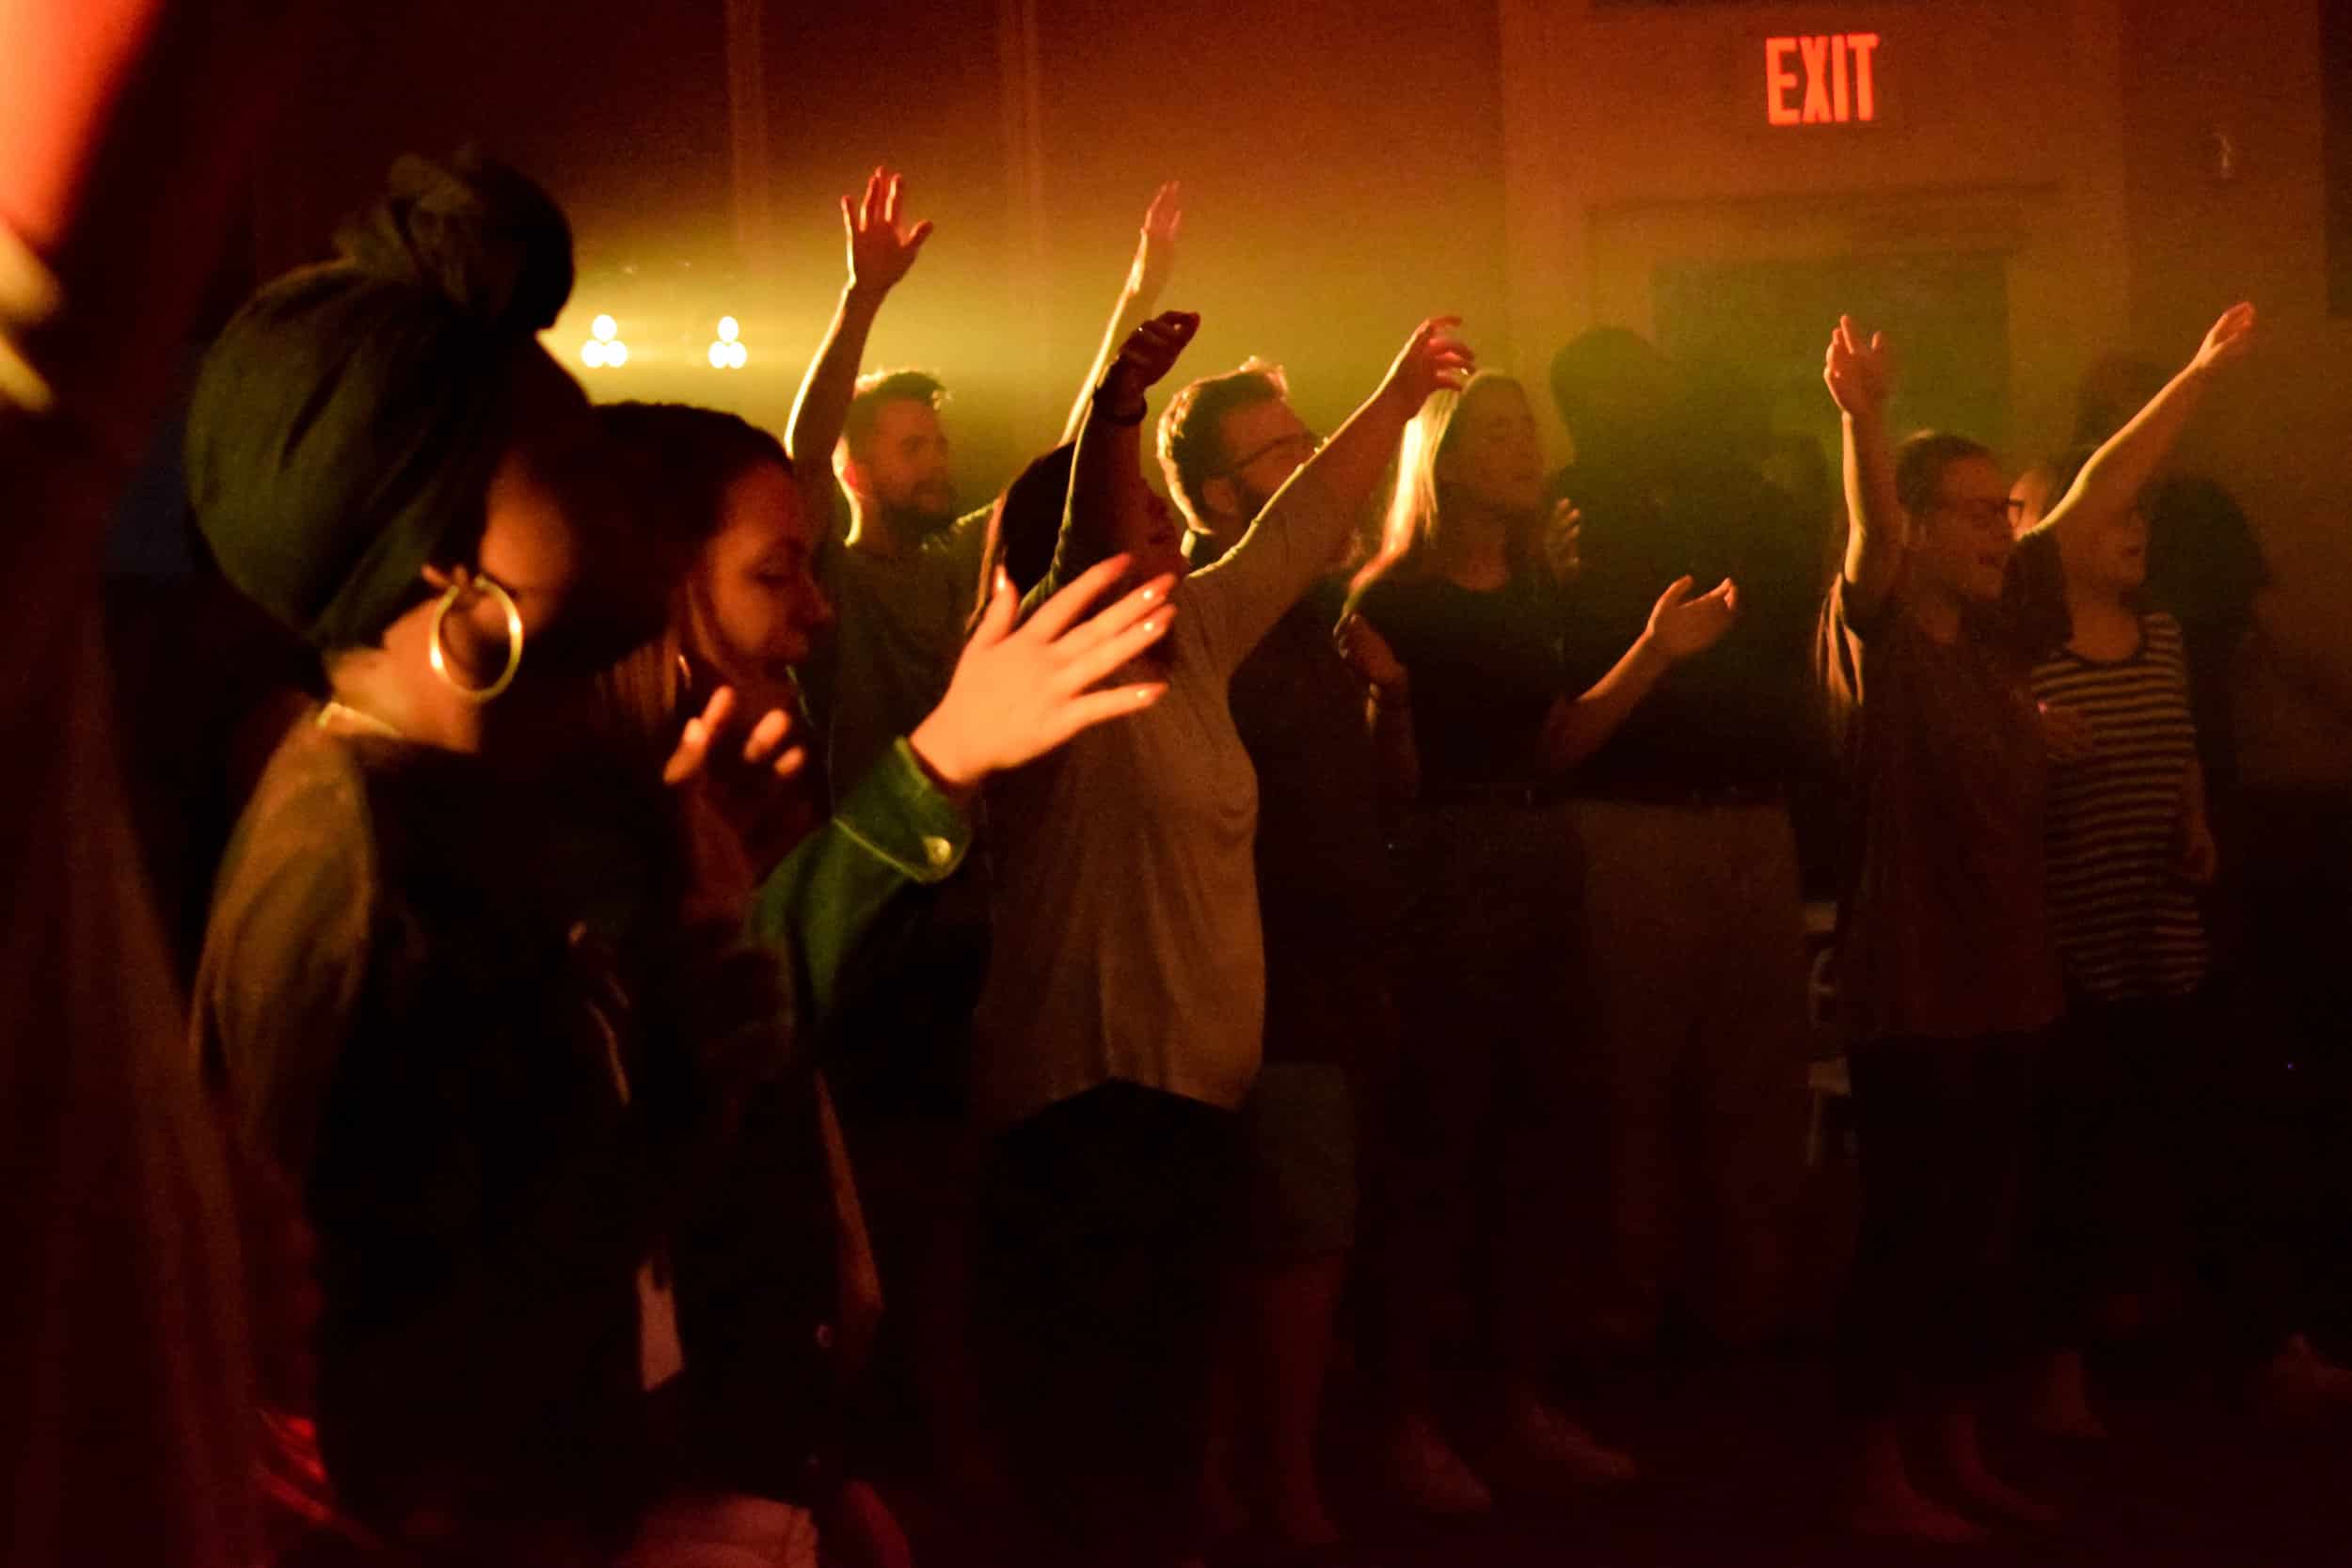 The audience feels the Spirit move as they sing along with the band and raise their hands in worship.